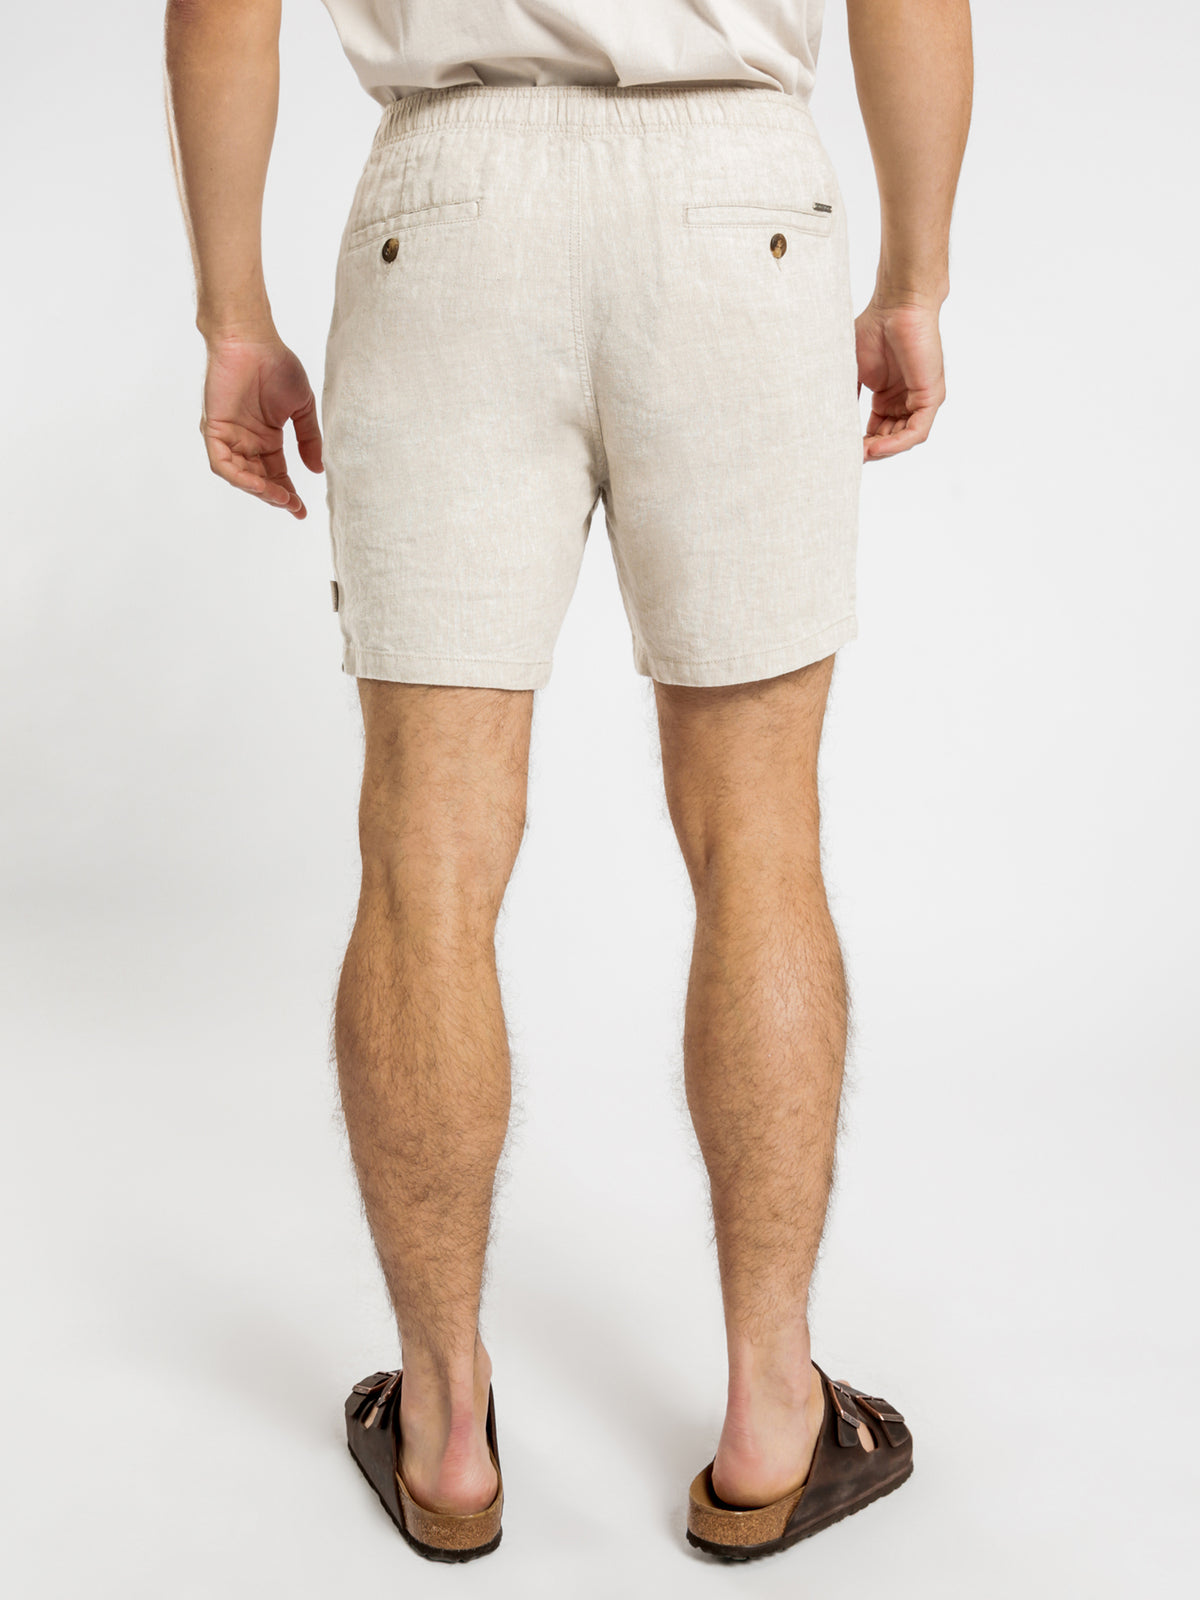 Nelson Shorts in Natural Marle Linen